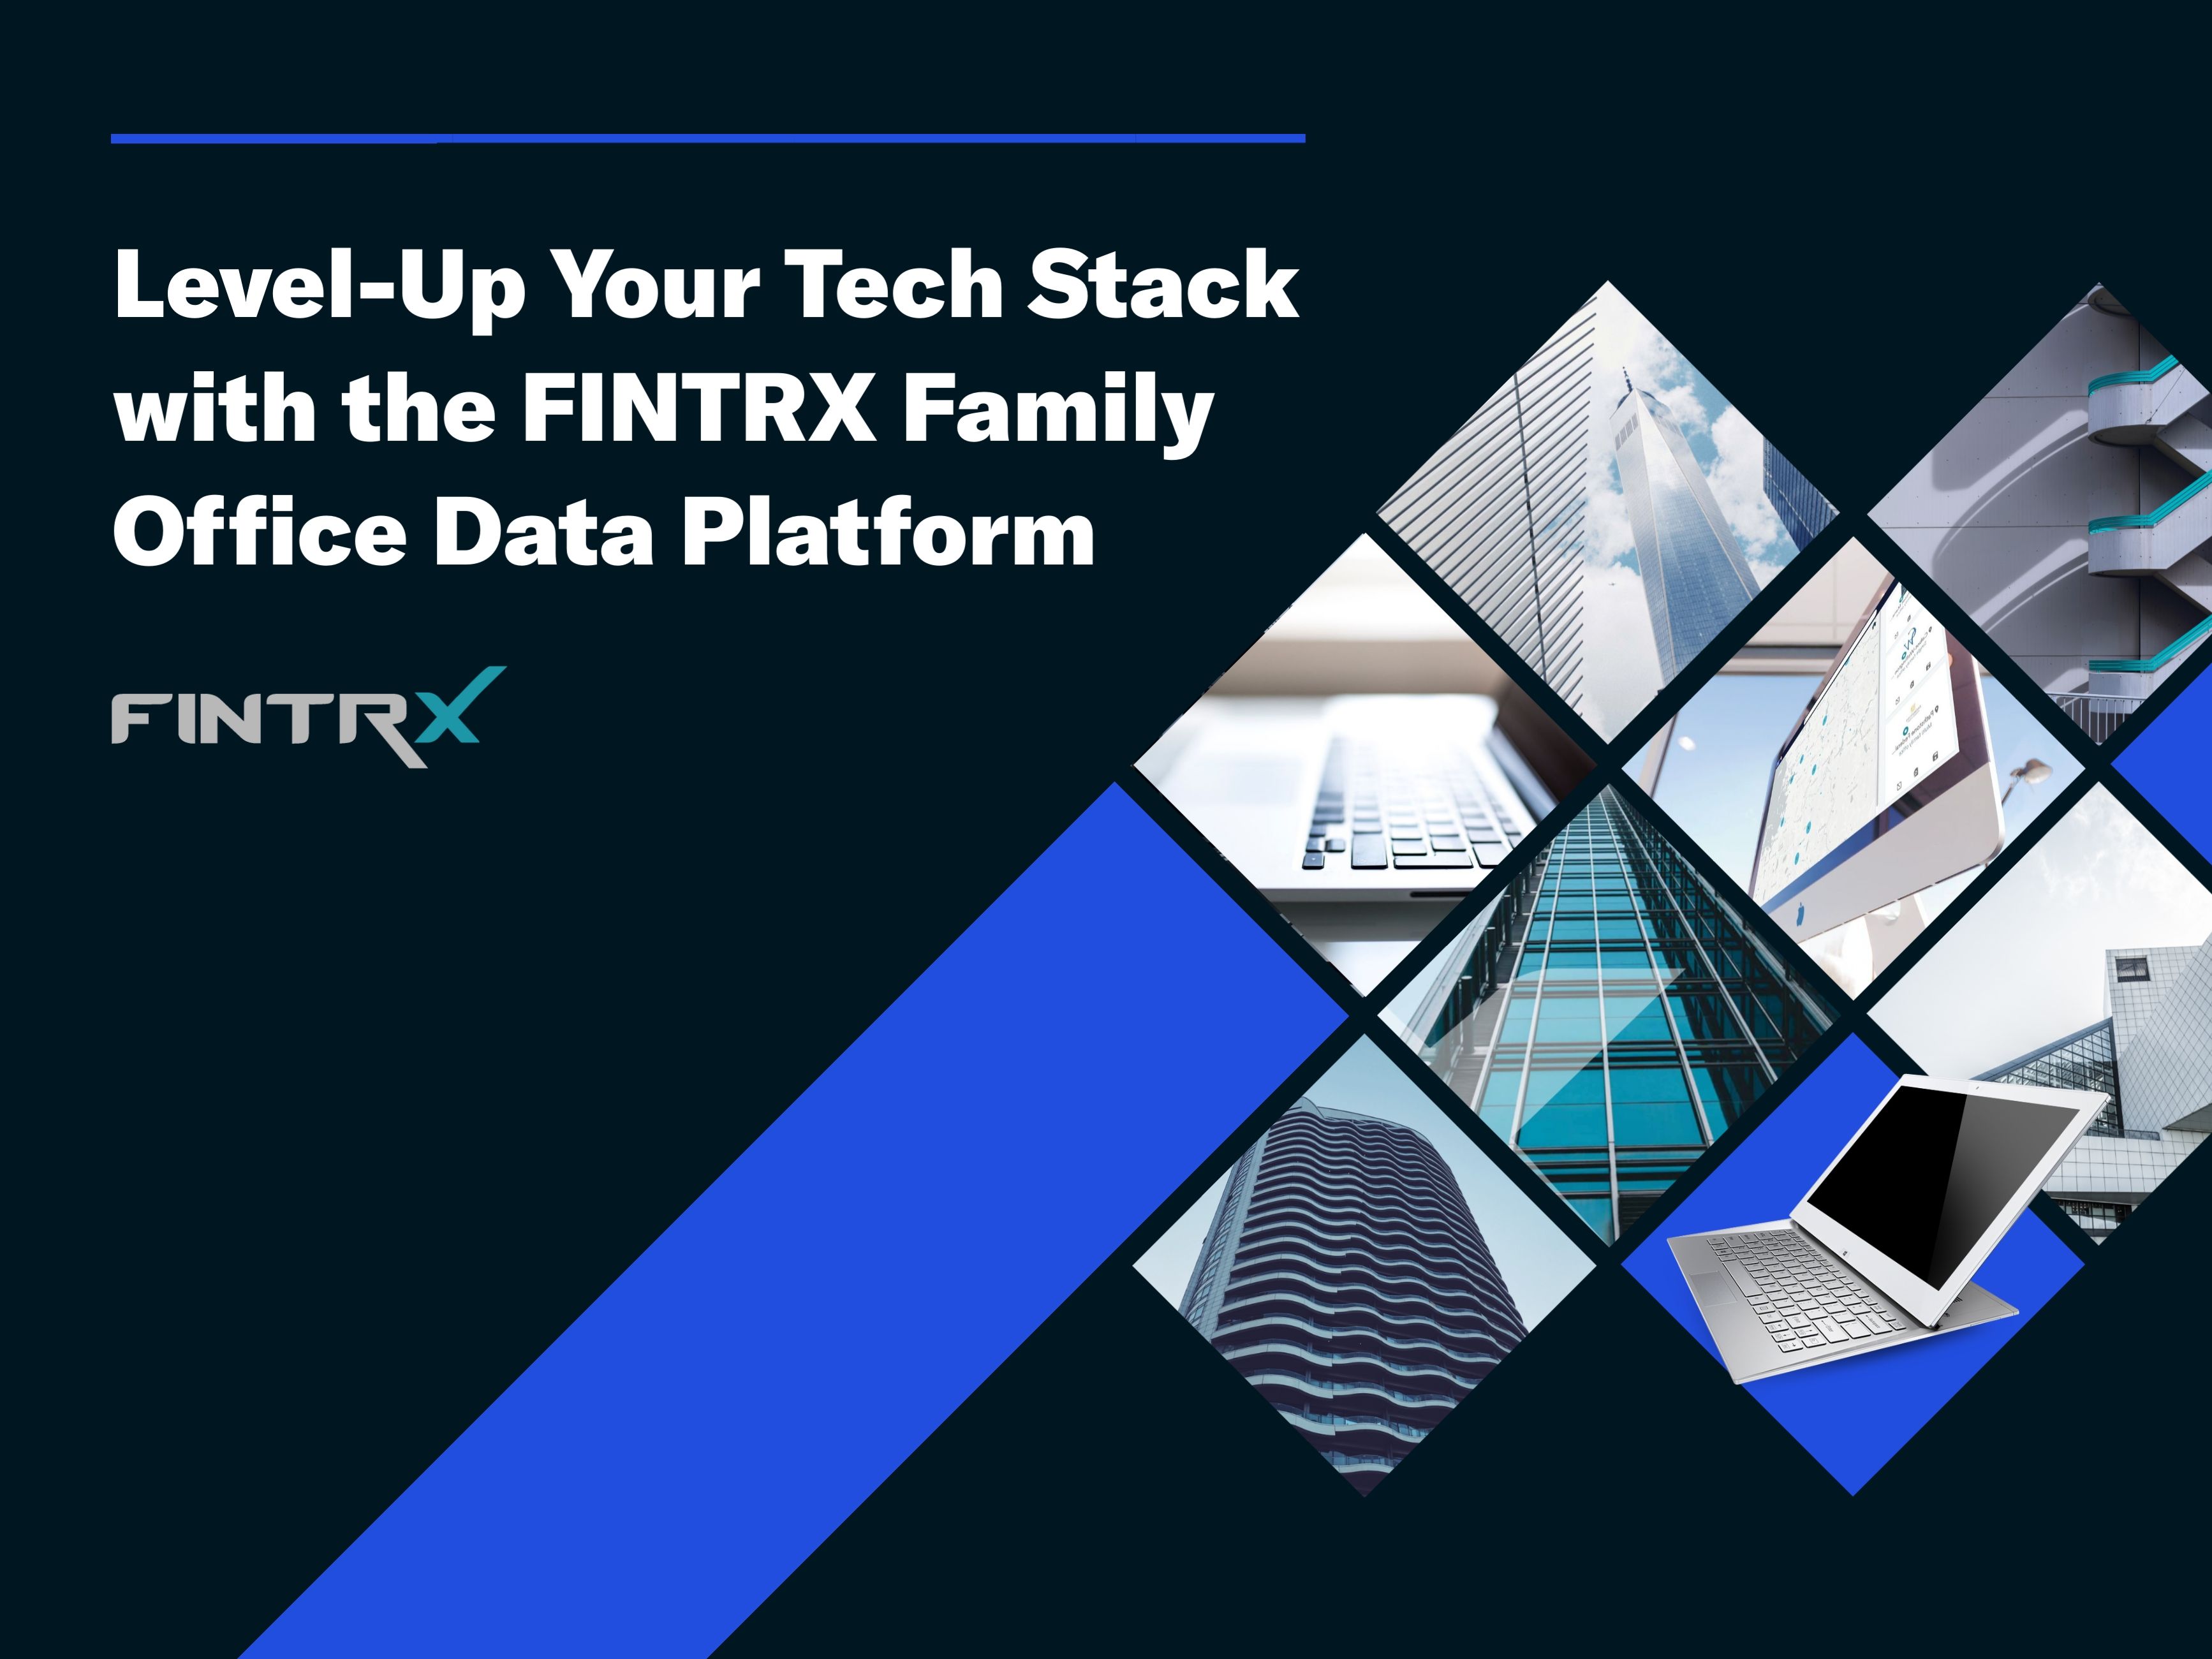 Level-Up Your Tech Stack with the FINTRX Family Office Data Platform